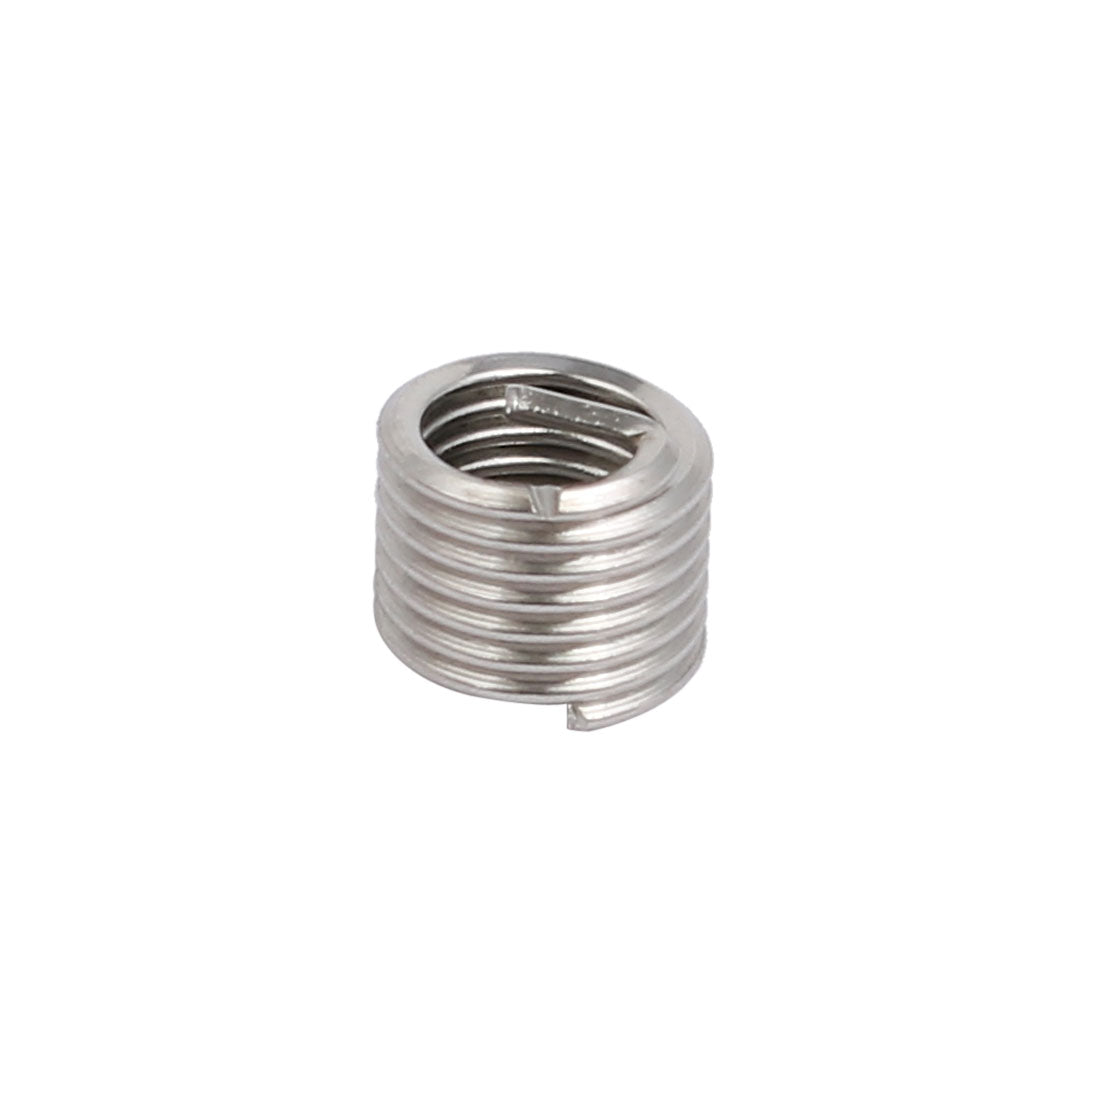 uxcell Uxcell #10-32x0.285" 304 Stainless Steel Helical Coil Wire Thread Insert 25pcs